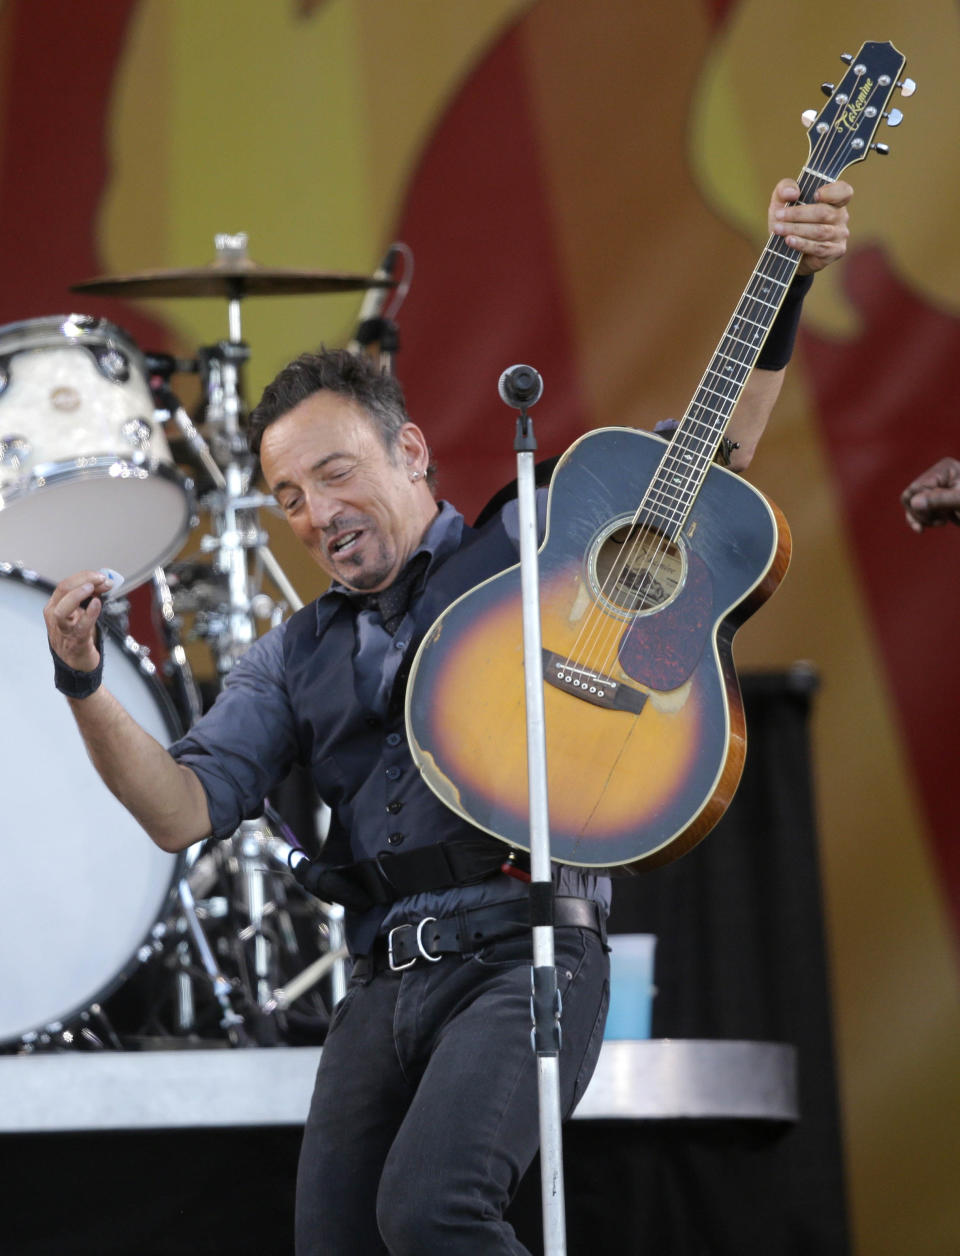 Bruce Springsteen performs at the New Orleans Jazz and Heritage Festival in New Orleans, Saturday, May 3, 2014. (AP Photo/Gerald Herbert)